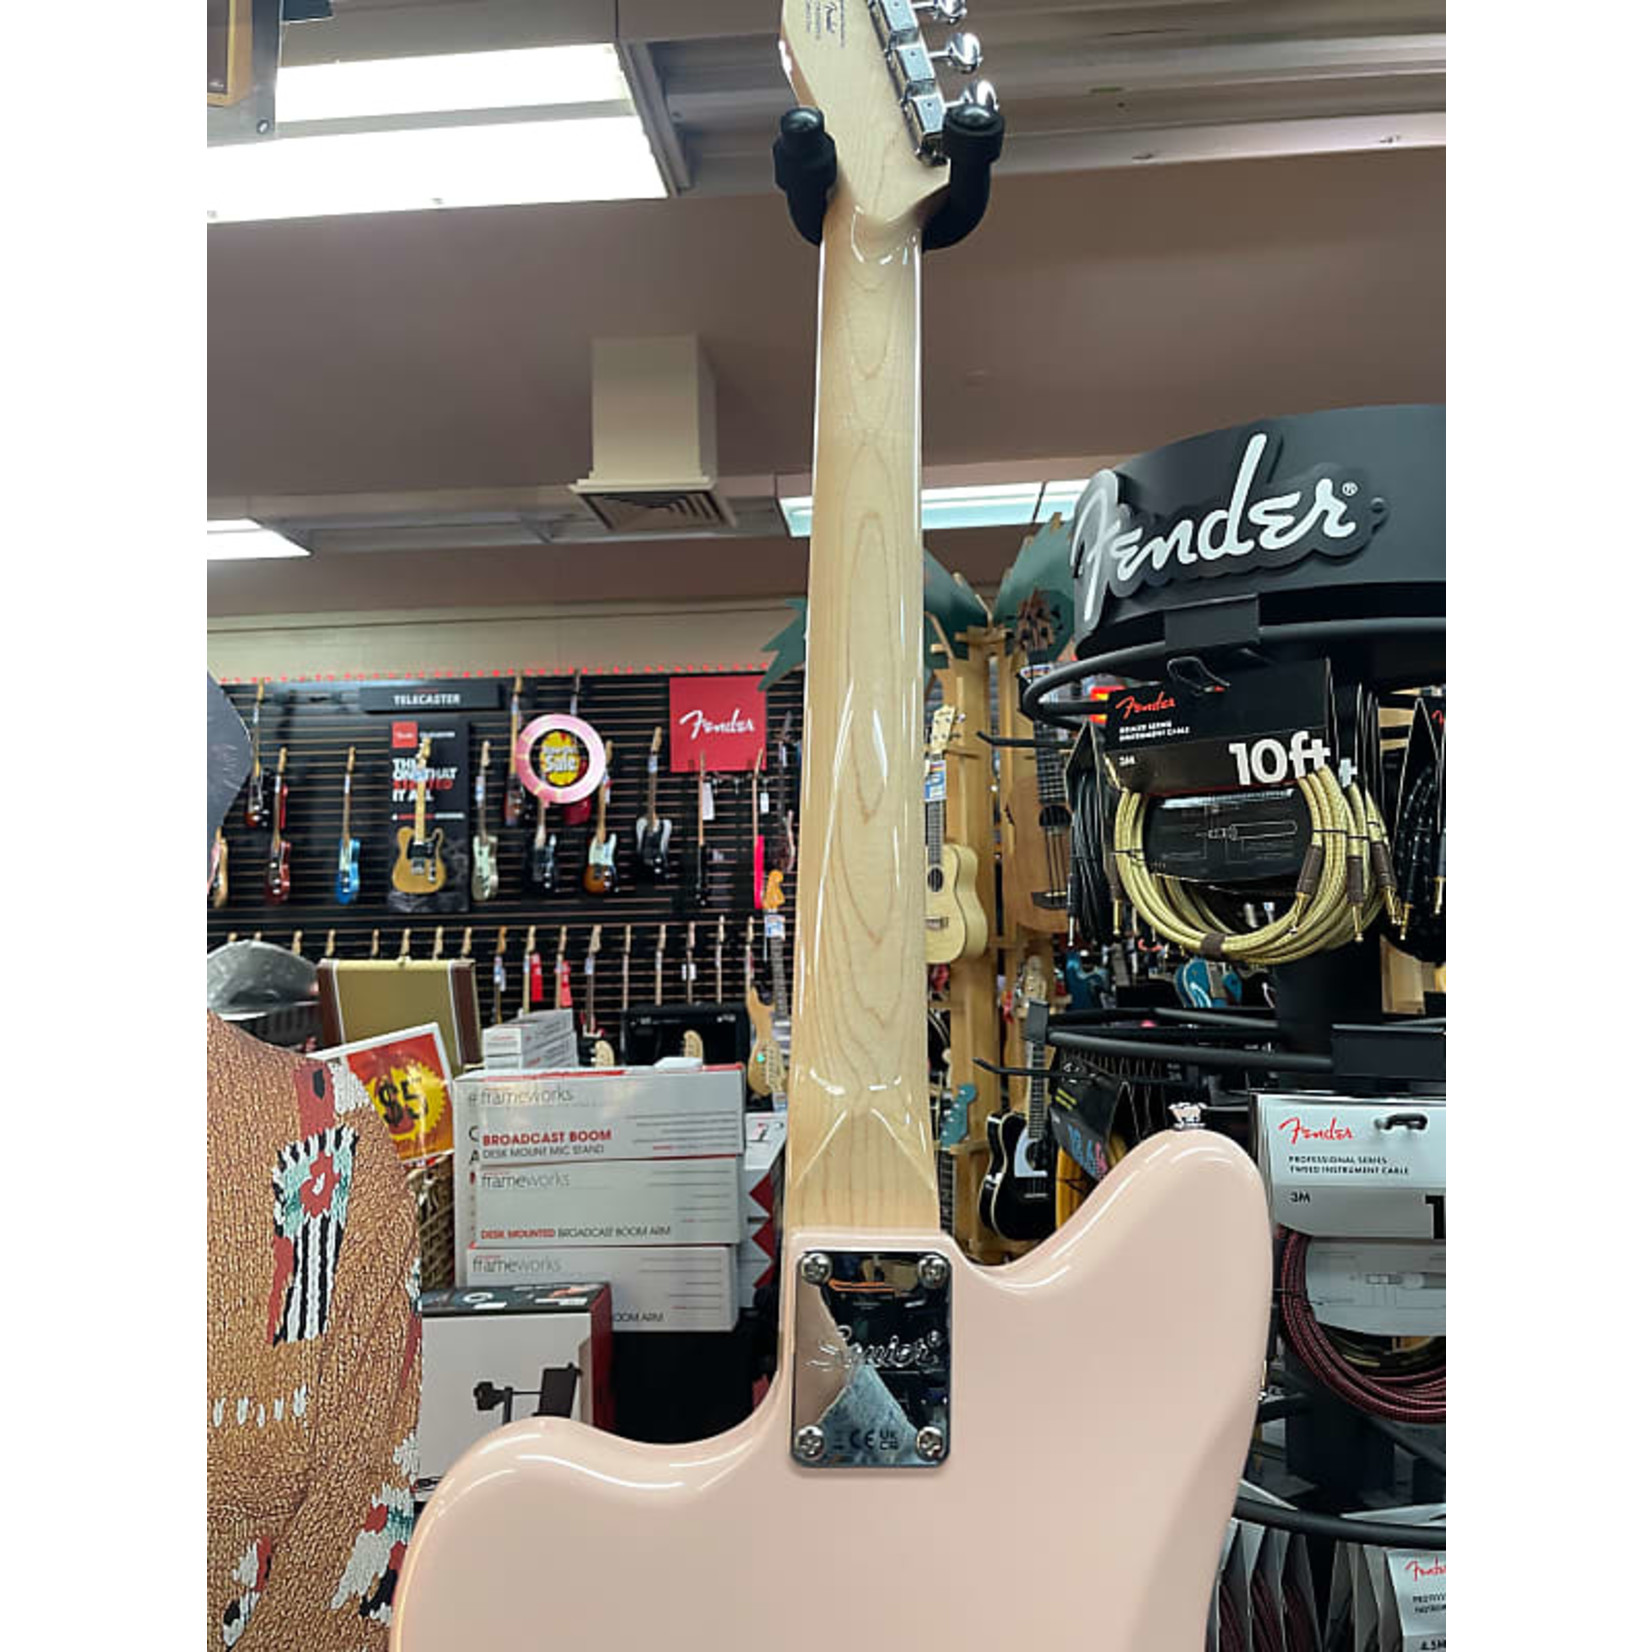 Squier ON SALE-Squier Paranormal Offset Telecaster Shell Pink